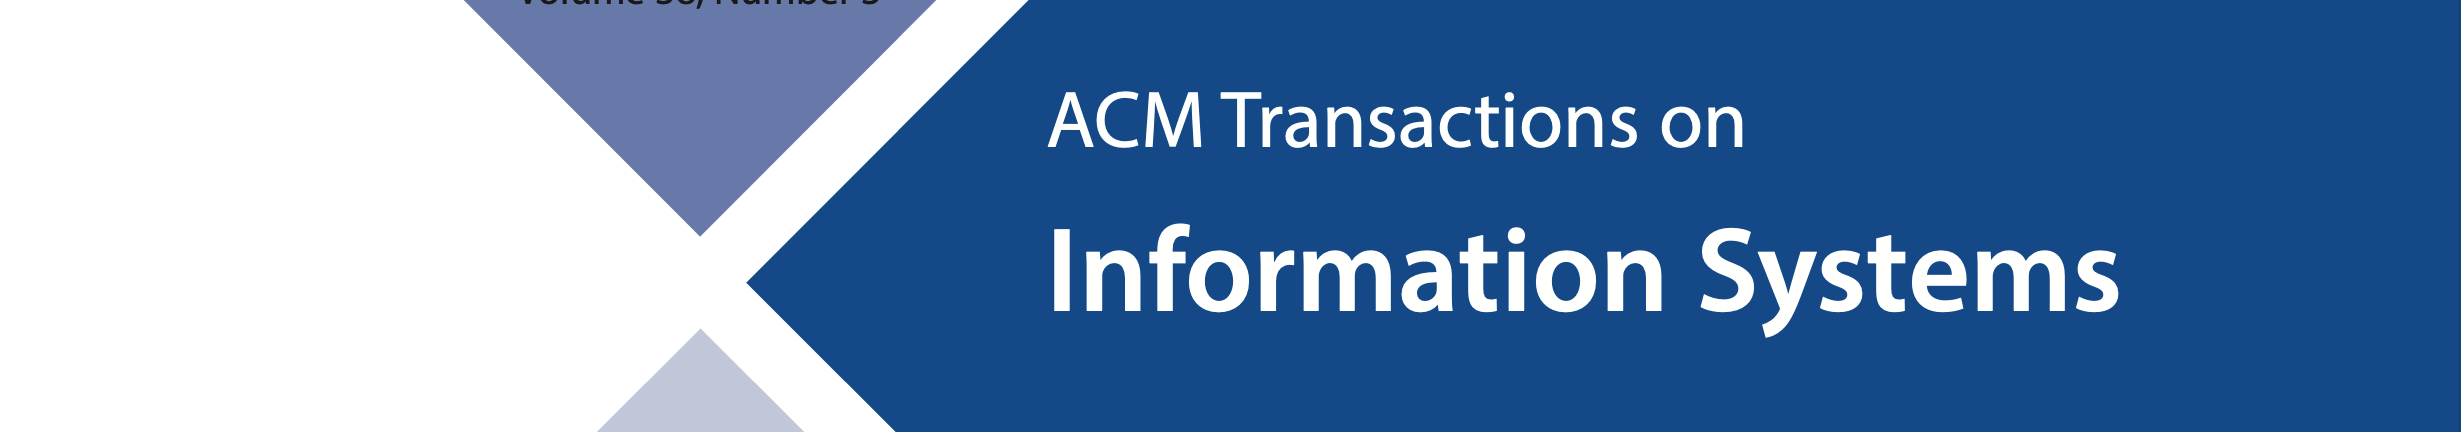 Paper Accepted by ACM Transactions on Information Systems